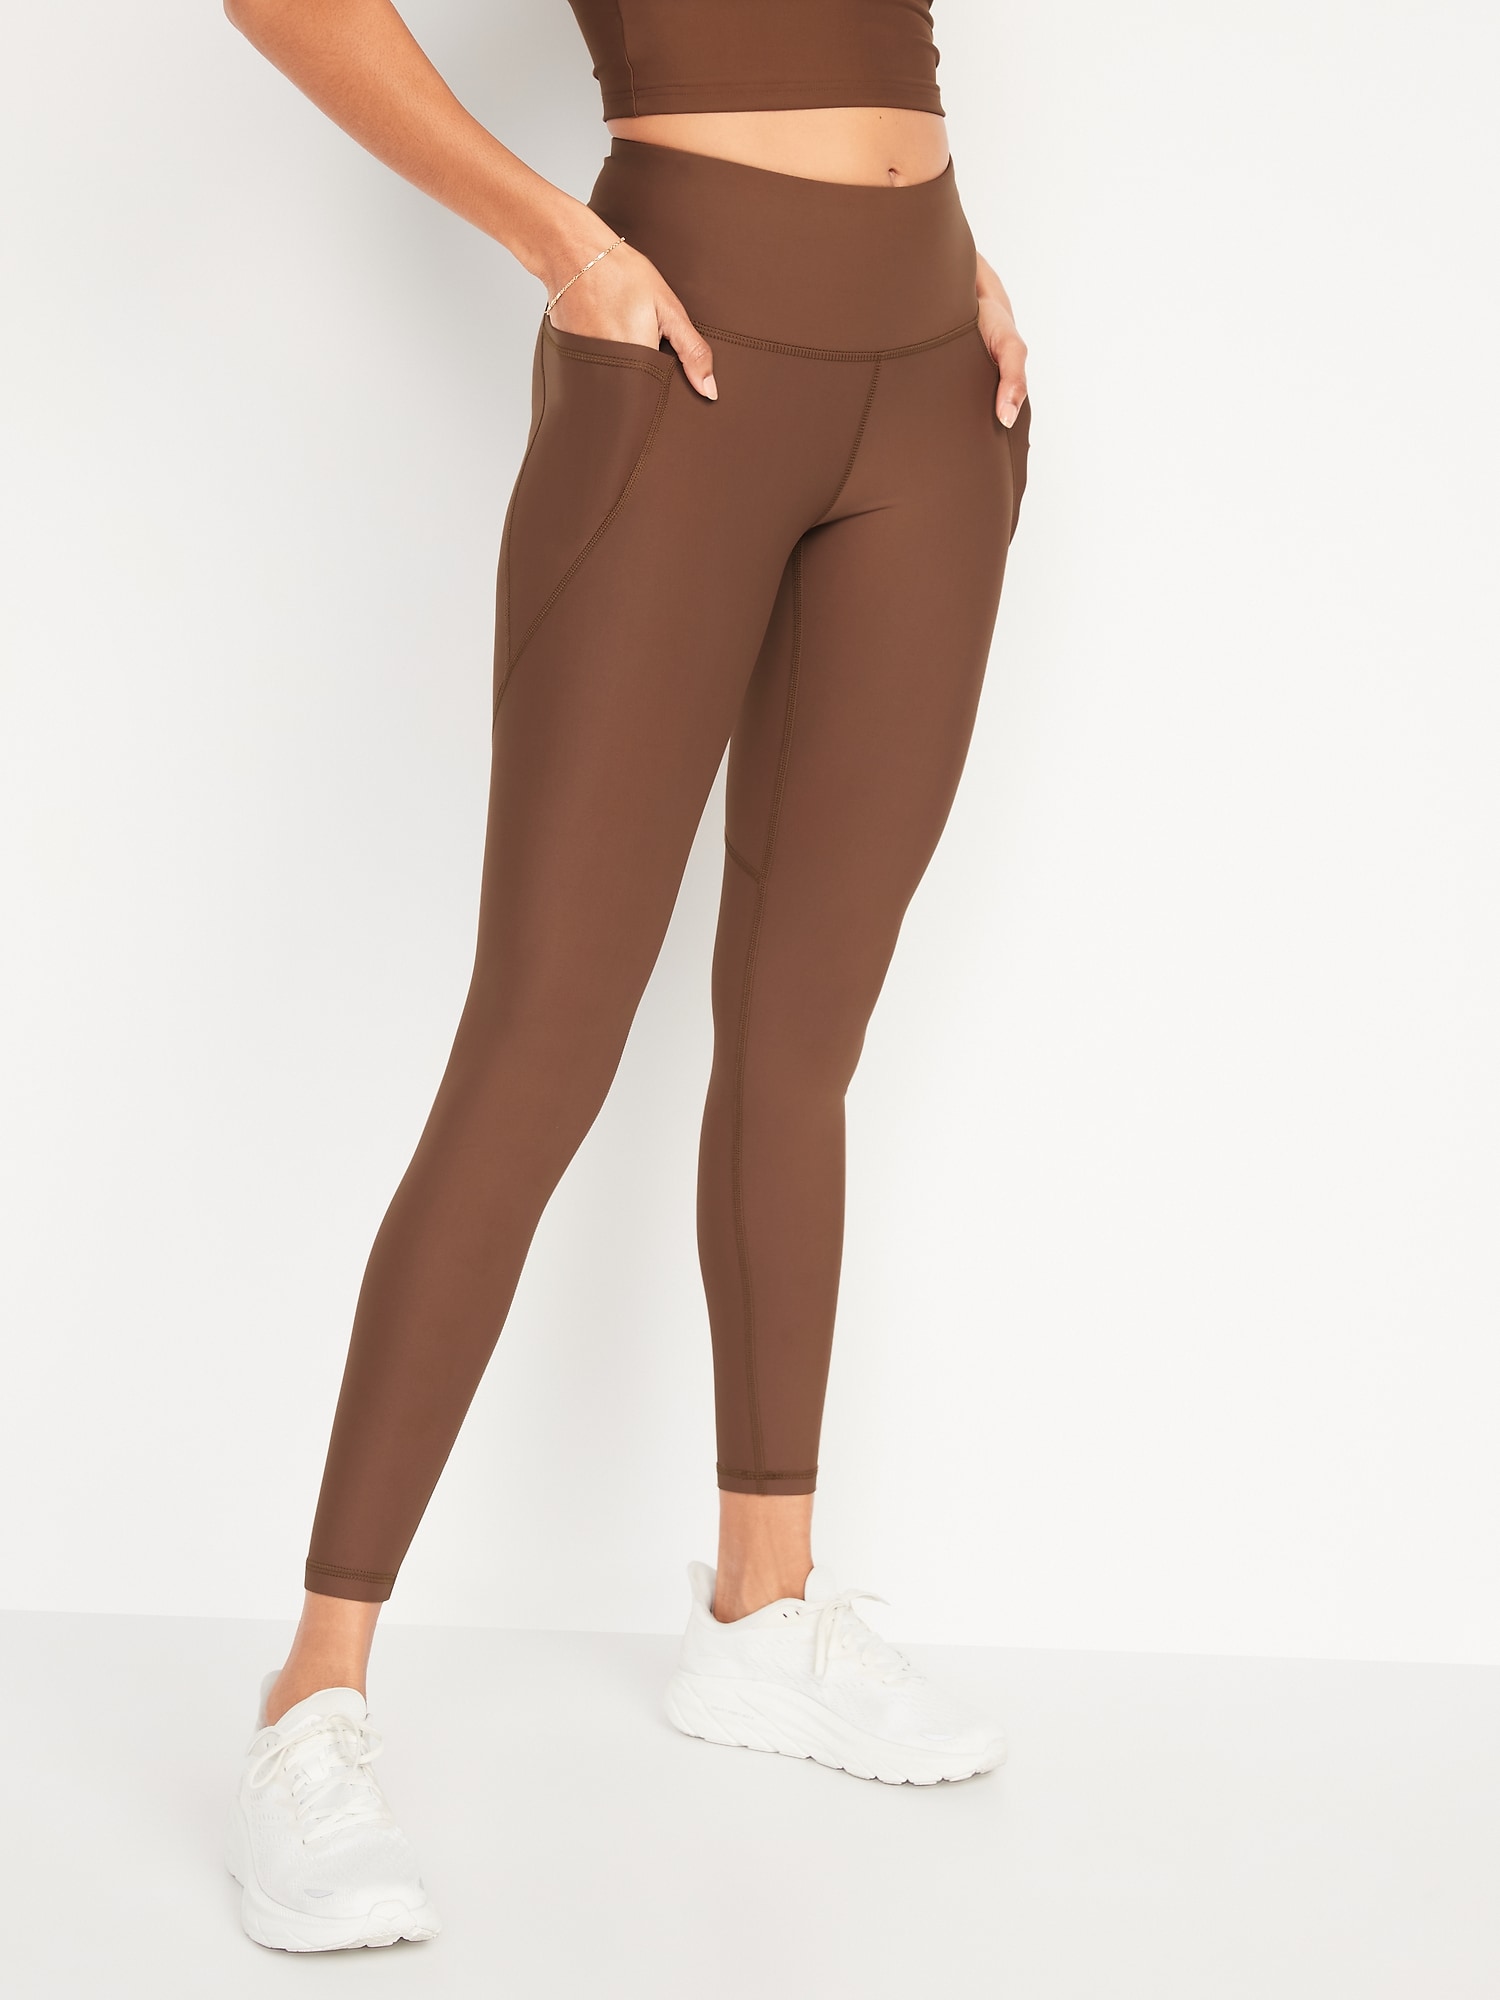 Extra High-Waisted PowerSoft Leggings